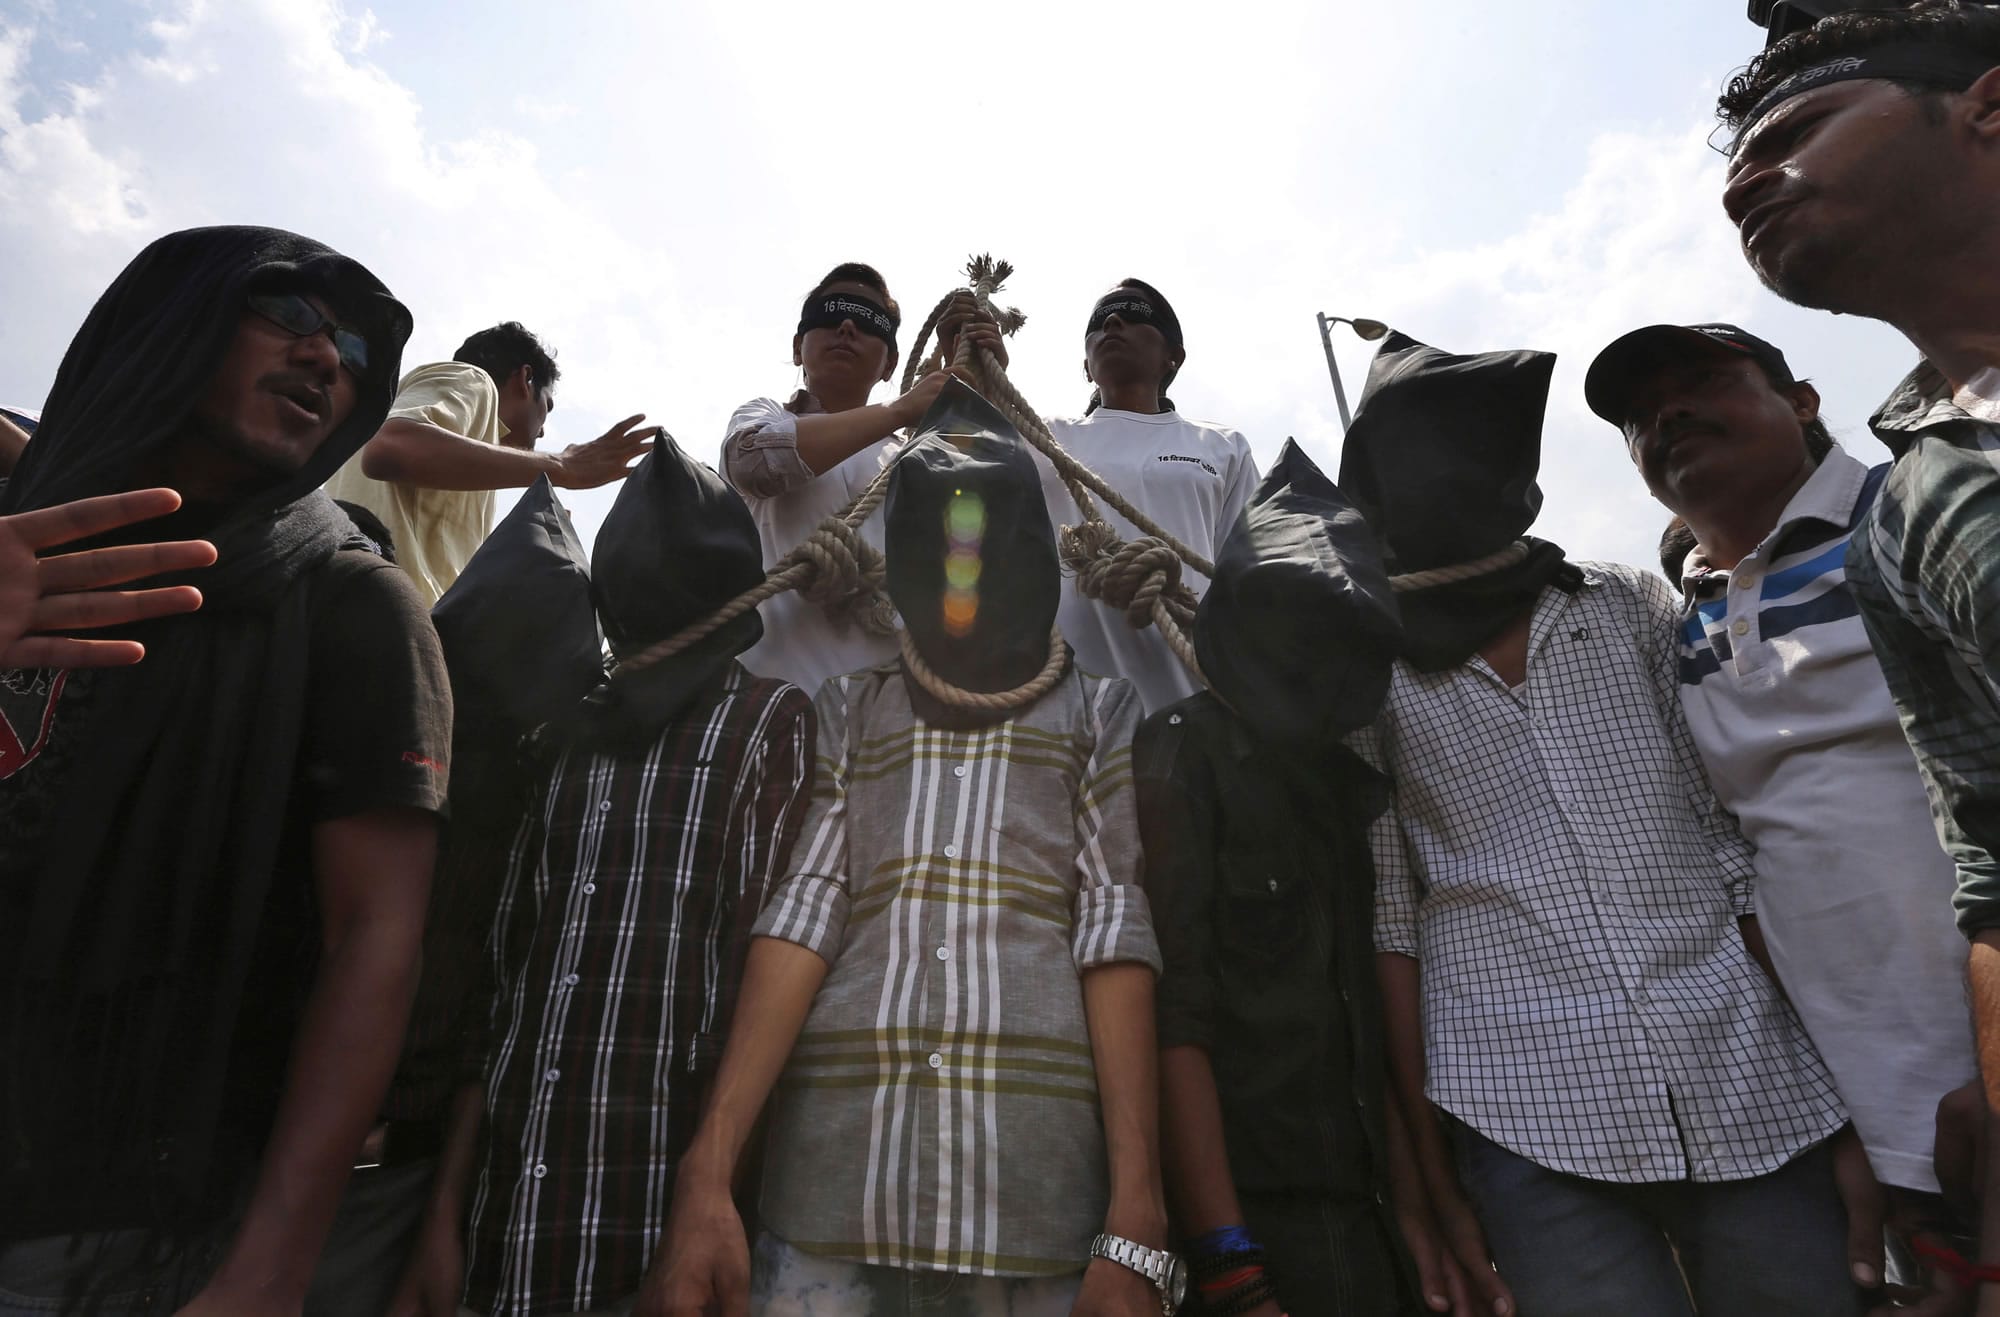 Indian protesters stage a mock hanging scene to demand death sentence for four men after a judge convicted them in the fatal gang rape of a young woman on a moving New Delhi bus last year, in New Delhi, India, on Tuesday.